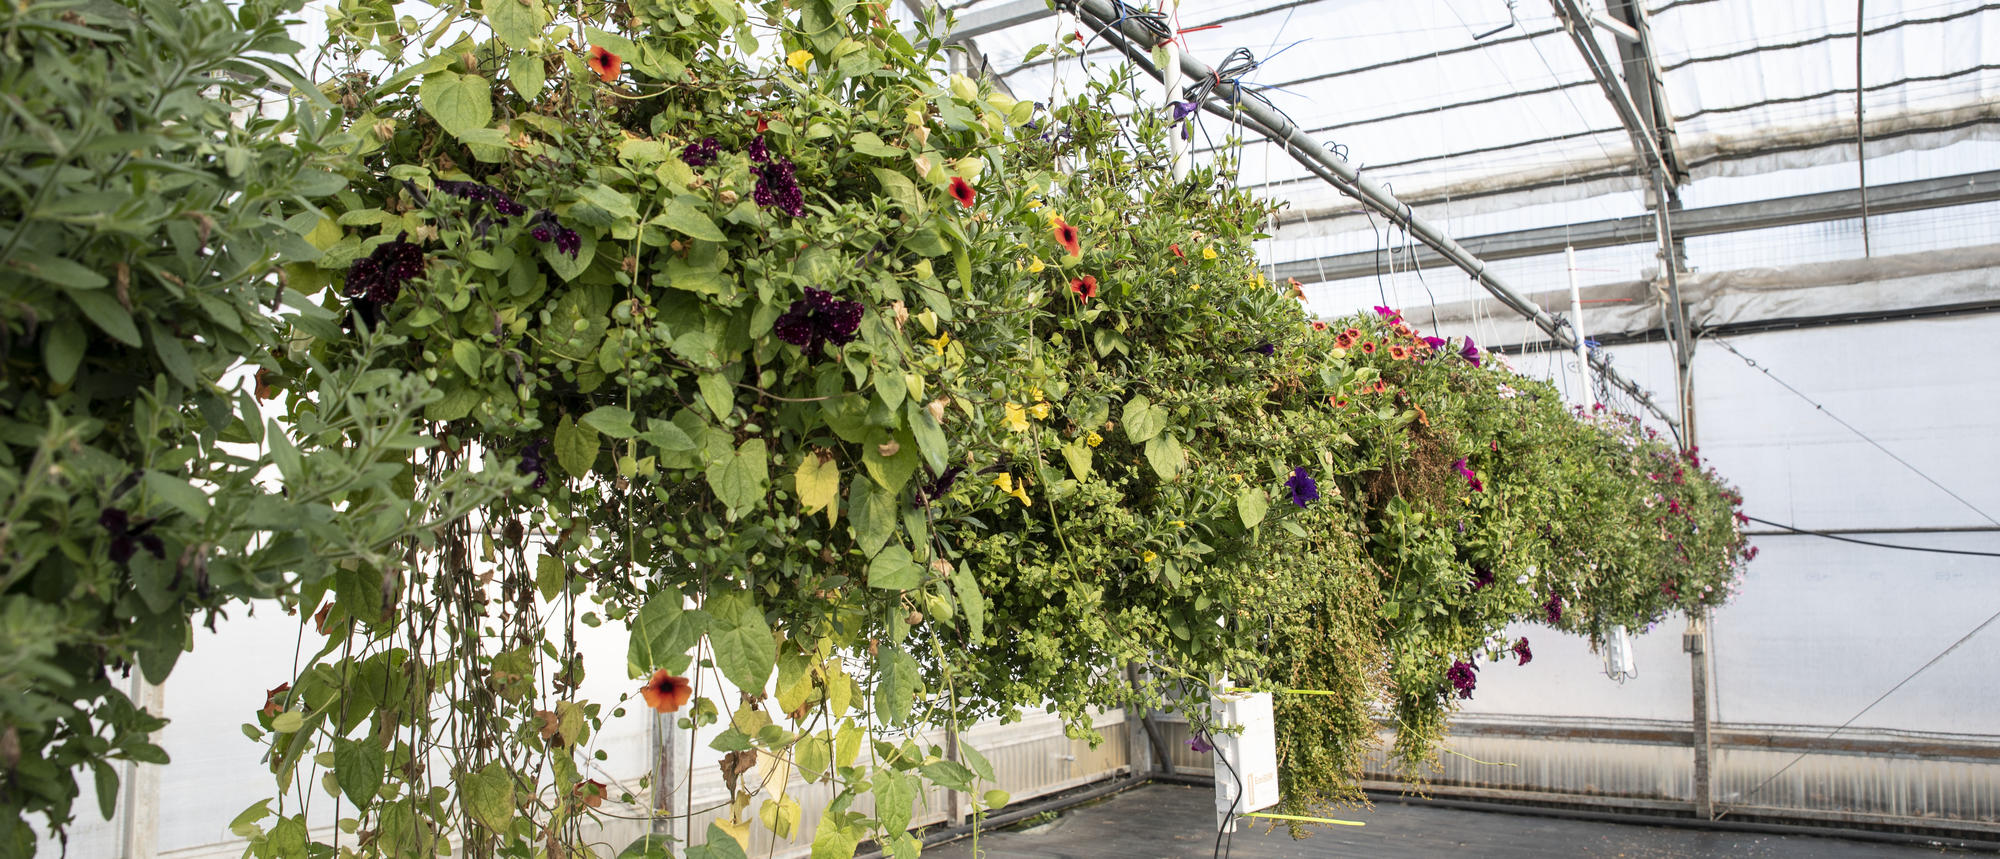 hanging baskets in a greenhouse